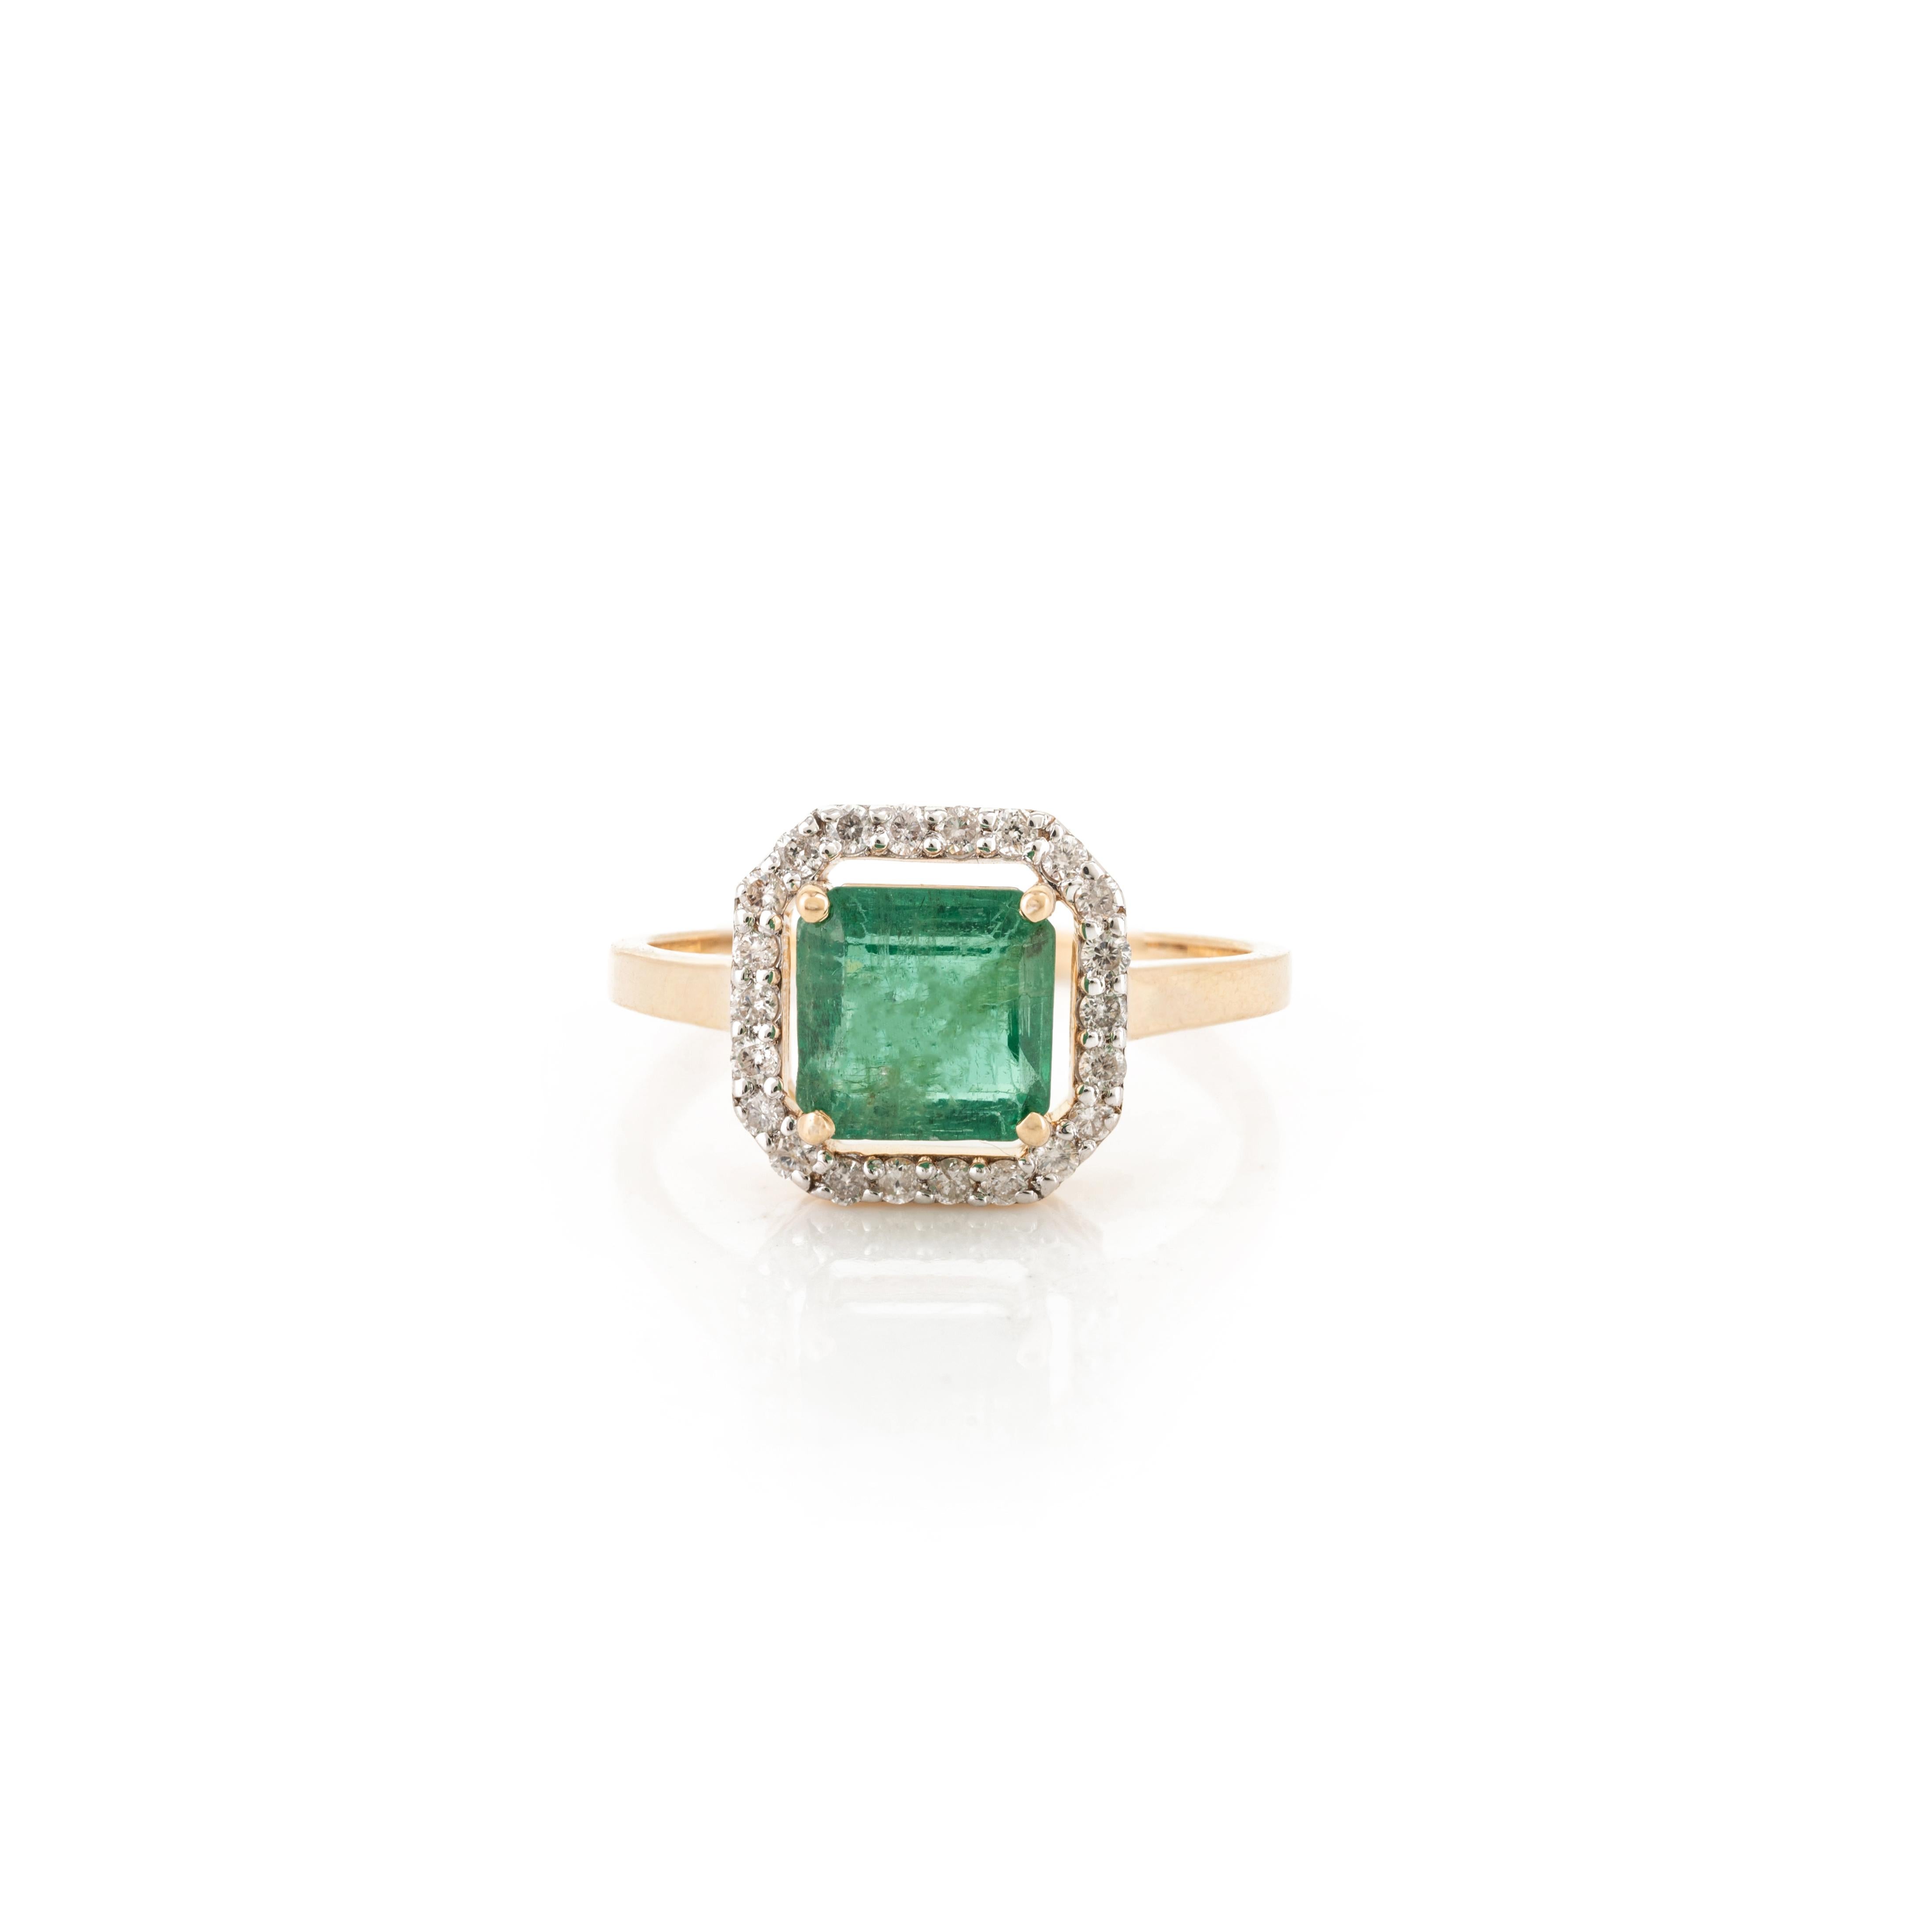 For Sale:  Certified 2.7 Carat Octagon Emerald Halo Diamond Wedding Ring in 18k Yellow Gold 3